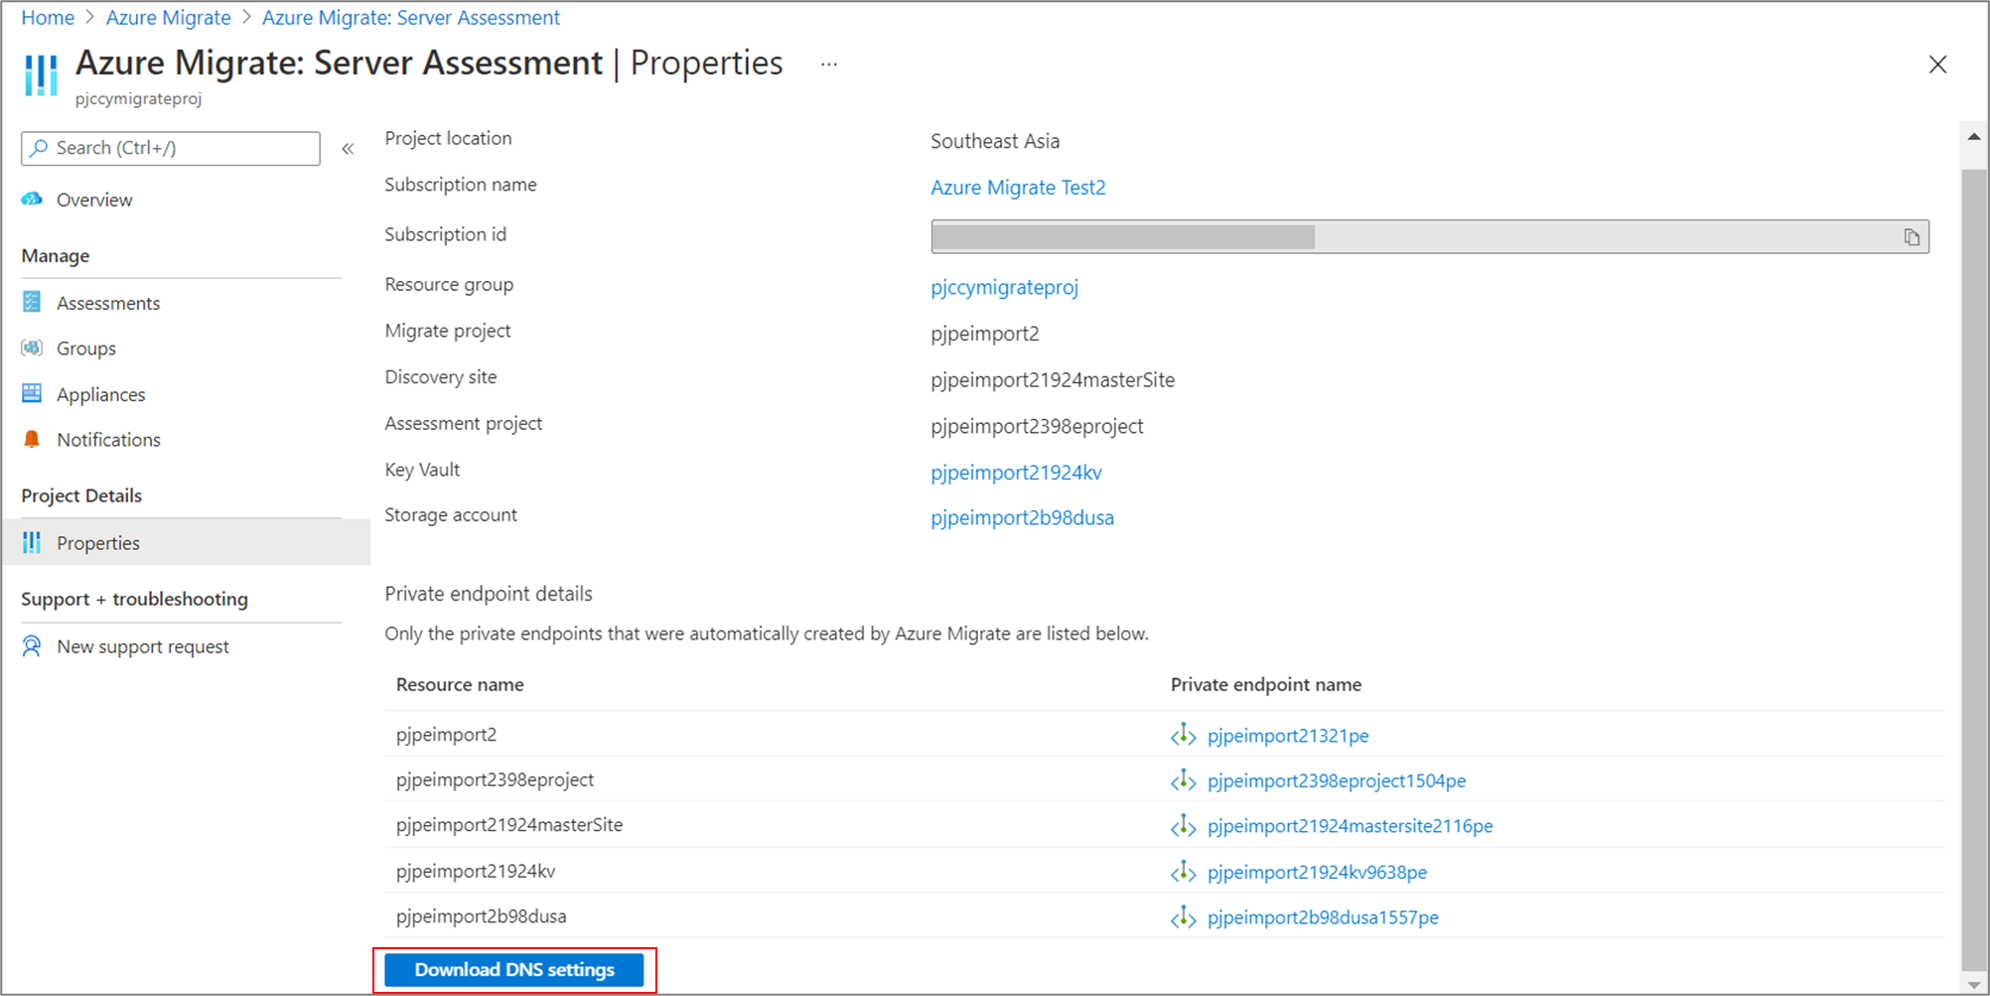 Azure Migrate: Discovery and Assessment Properties